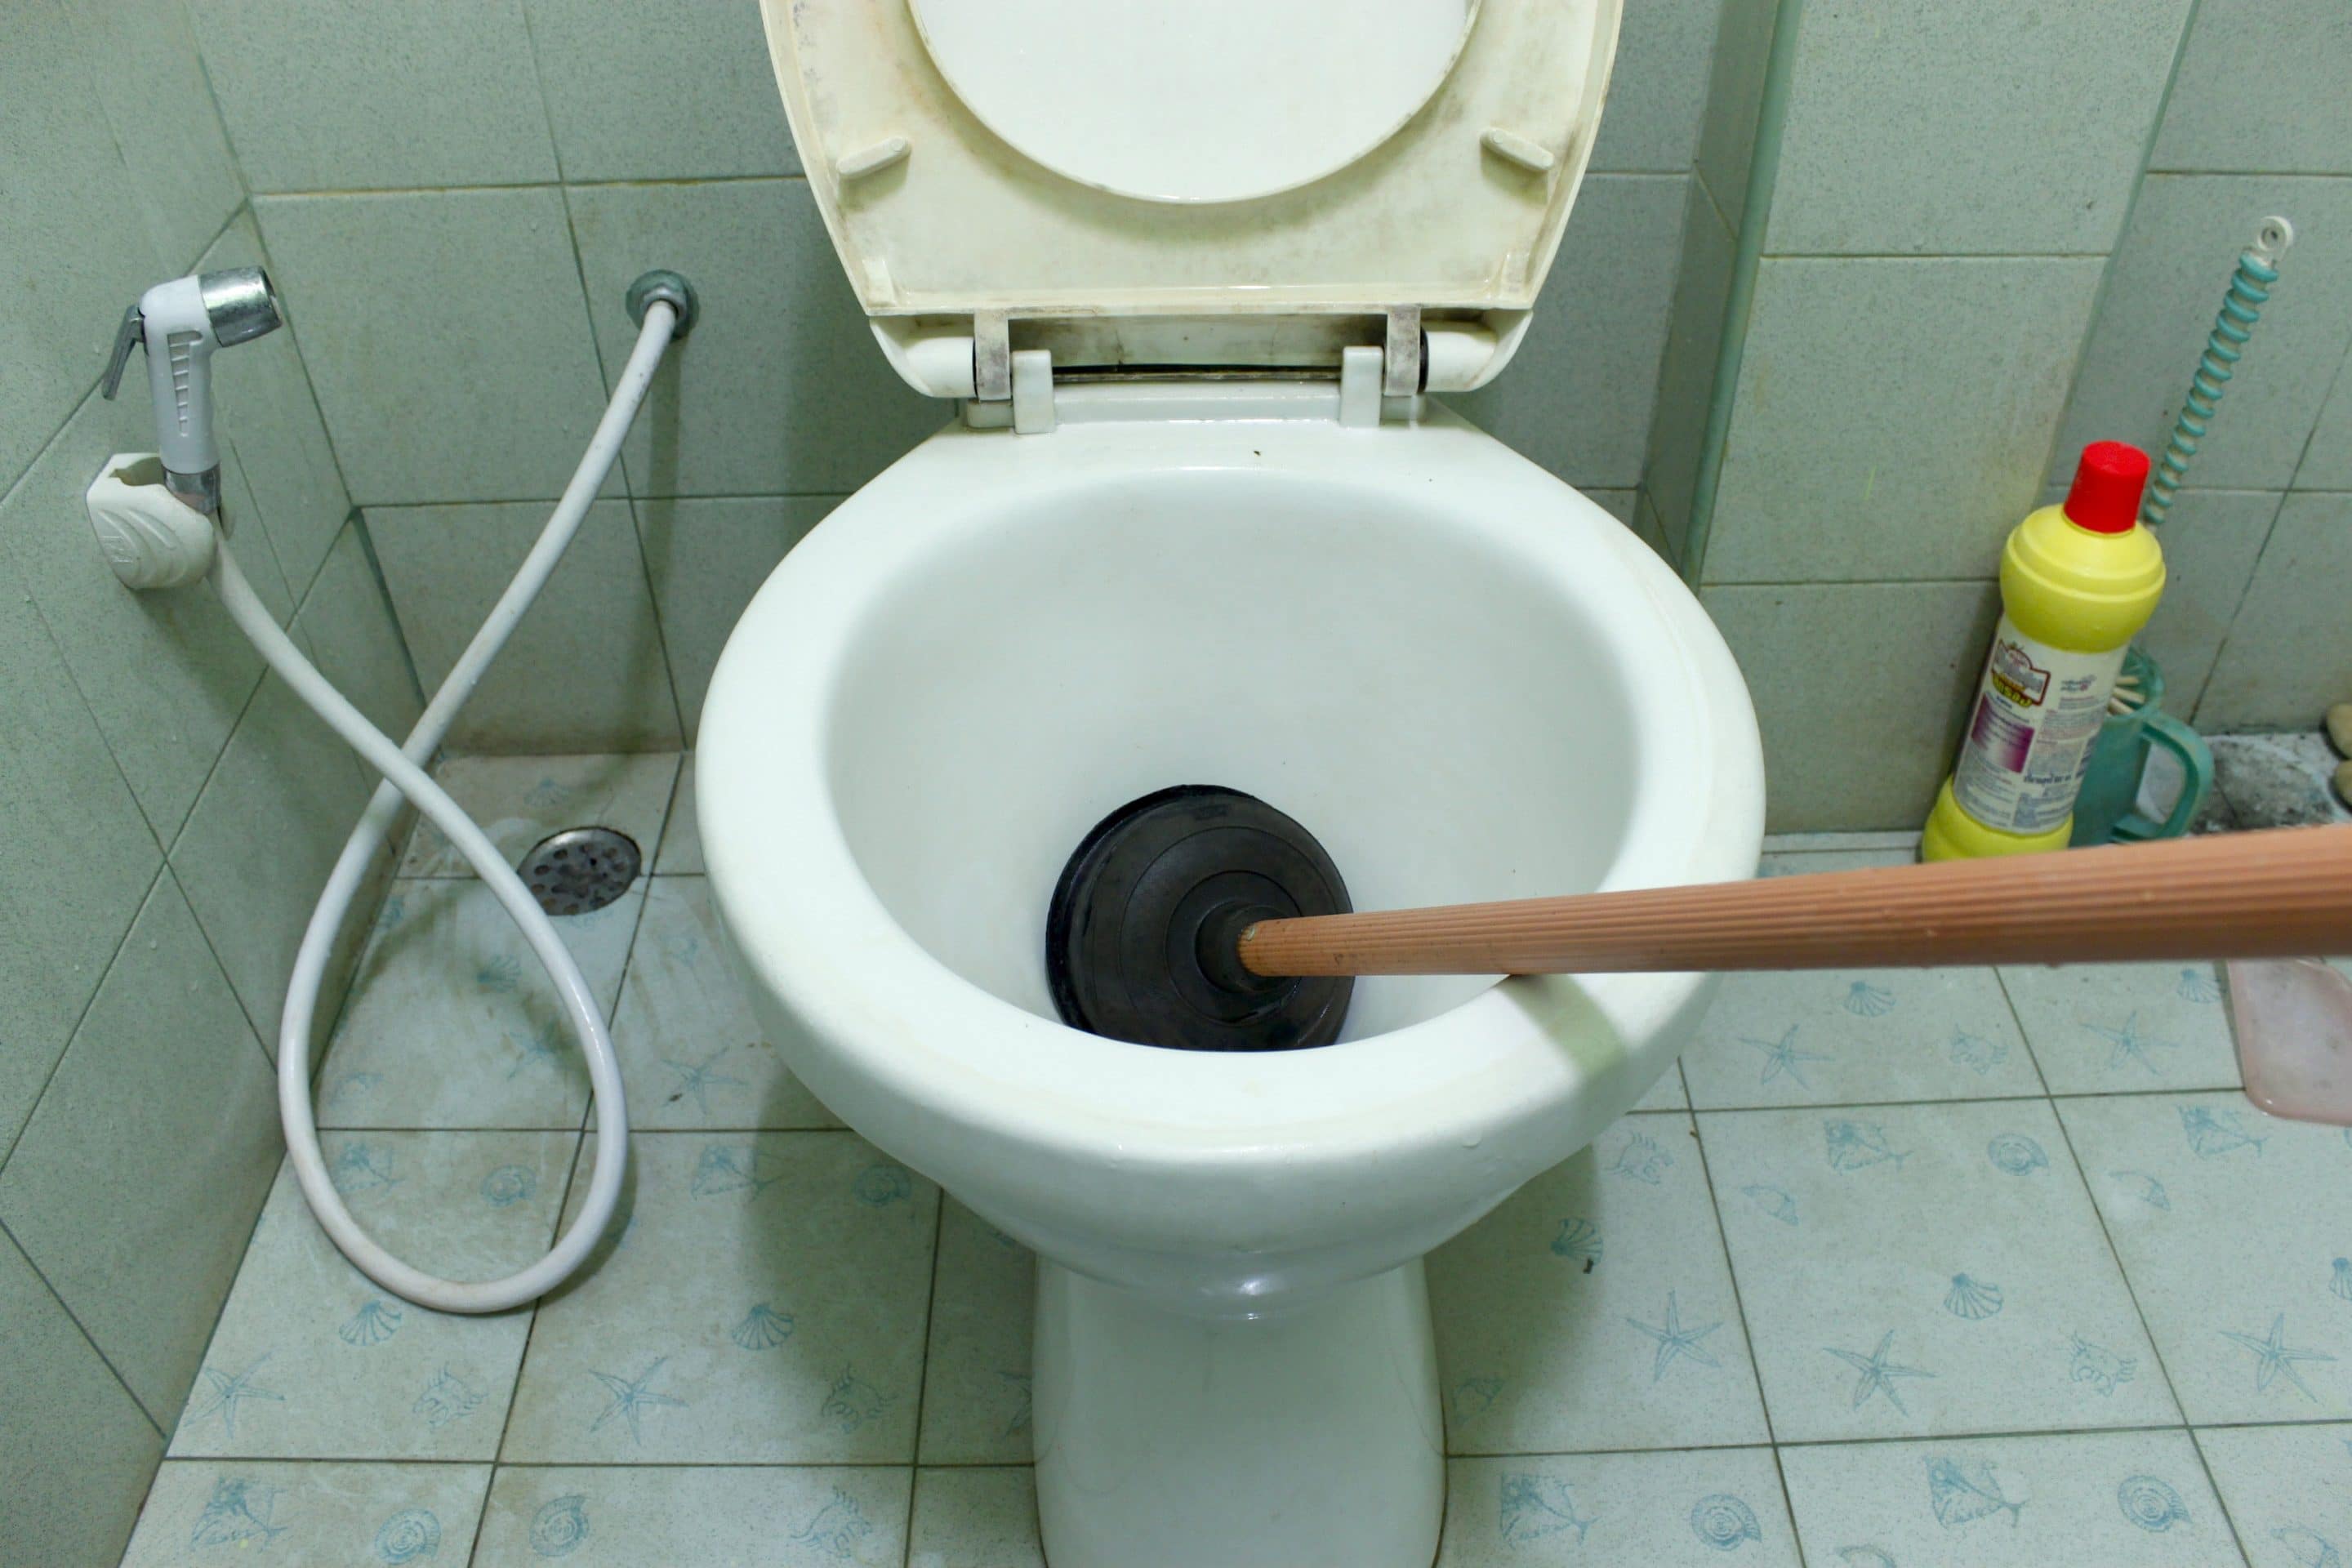 Clogged Toilet Causes, Solutions, And Advice - Balkan Drain Cleaning